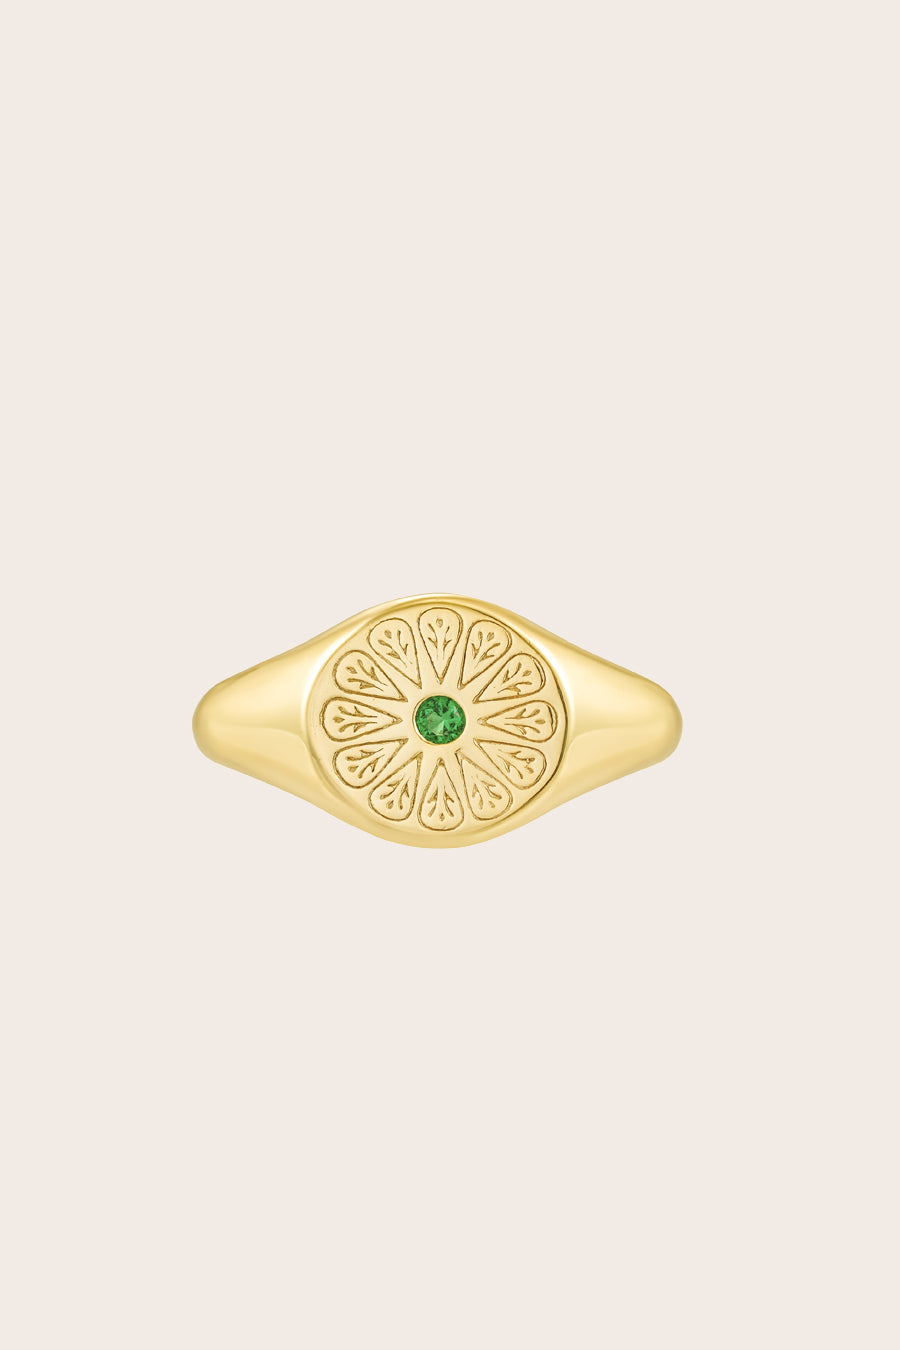 Gold May Emerald Birthstone Ring on cream background